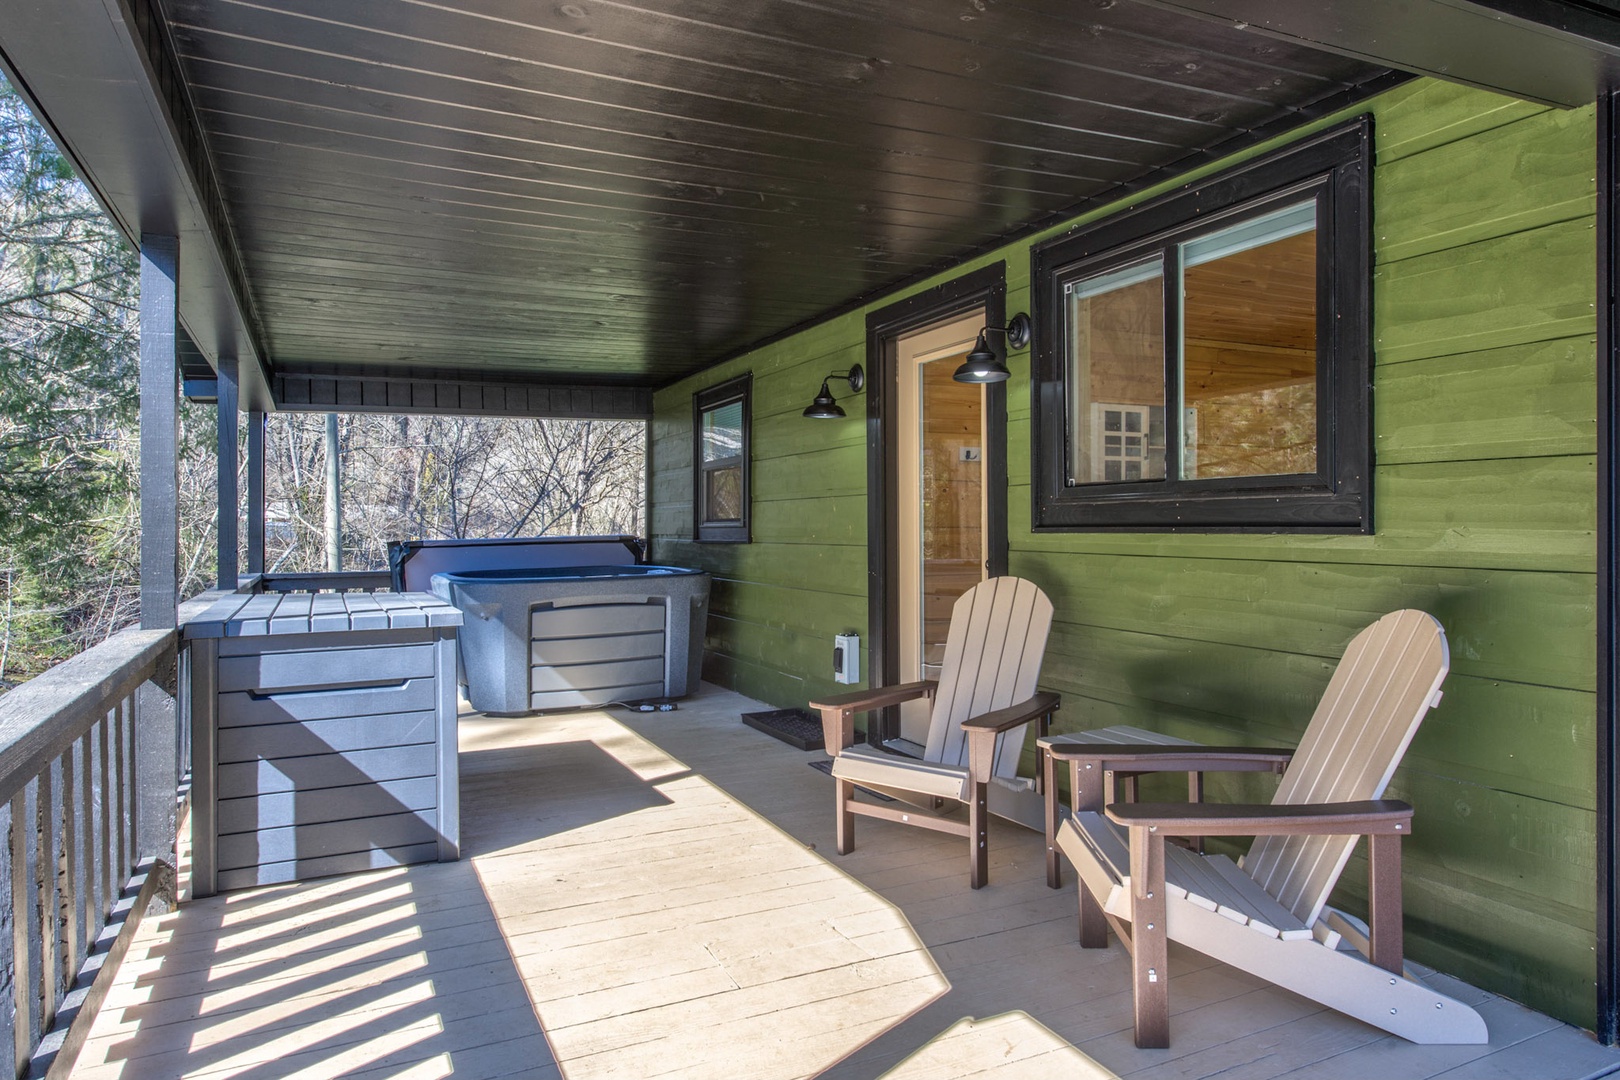 An idyllic retreat: chairs & hot tub, perfect for relaxation